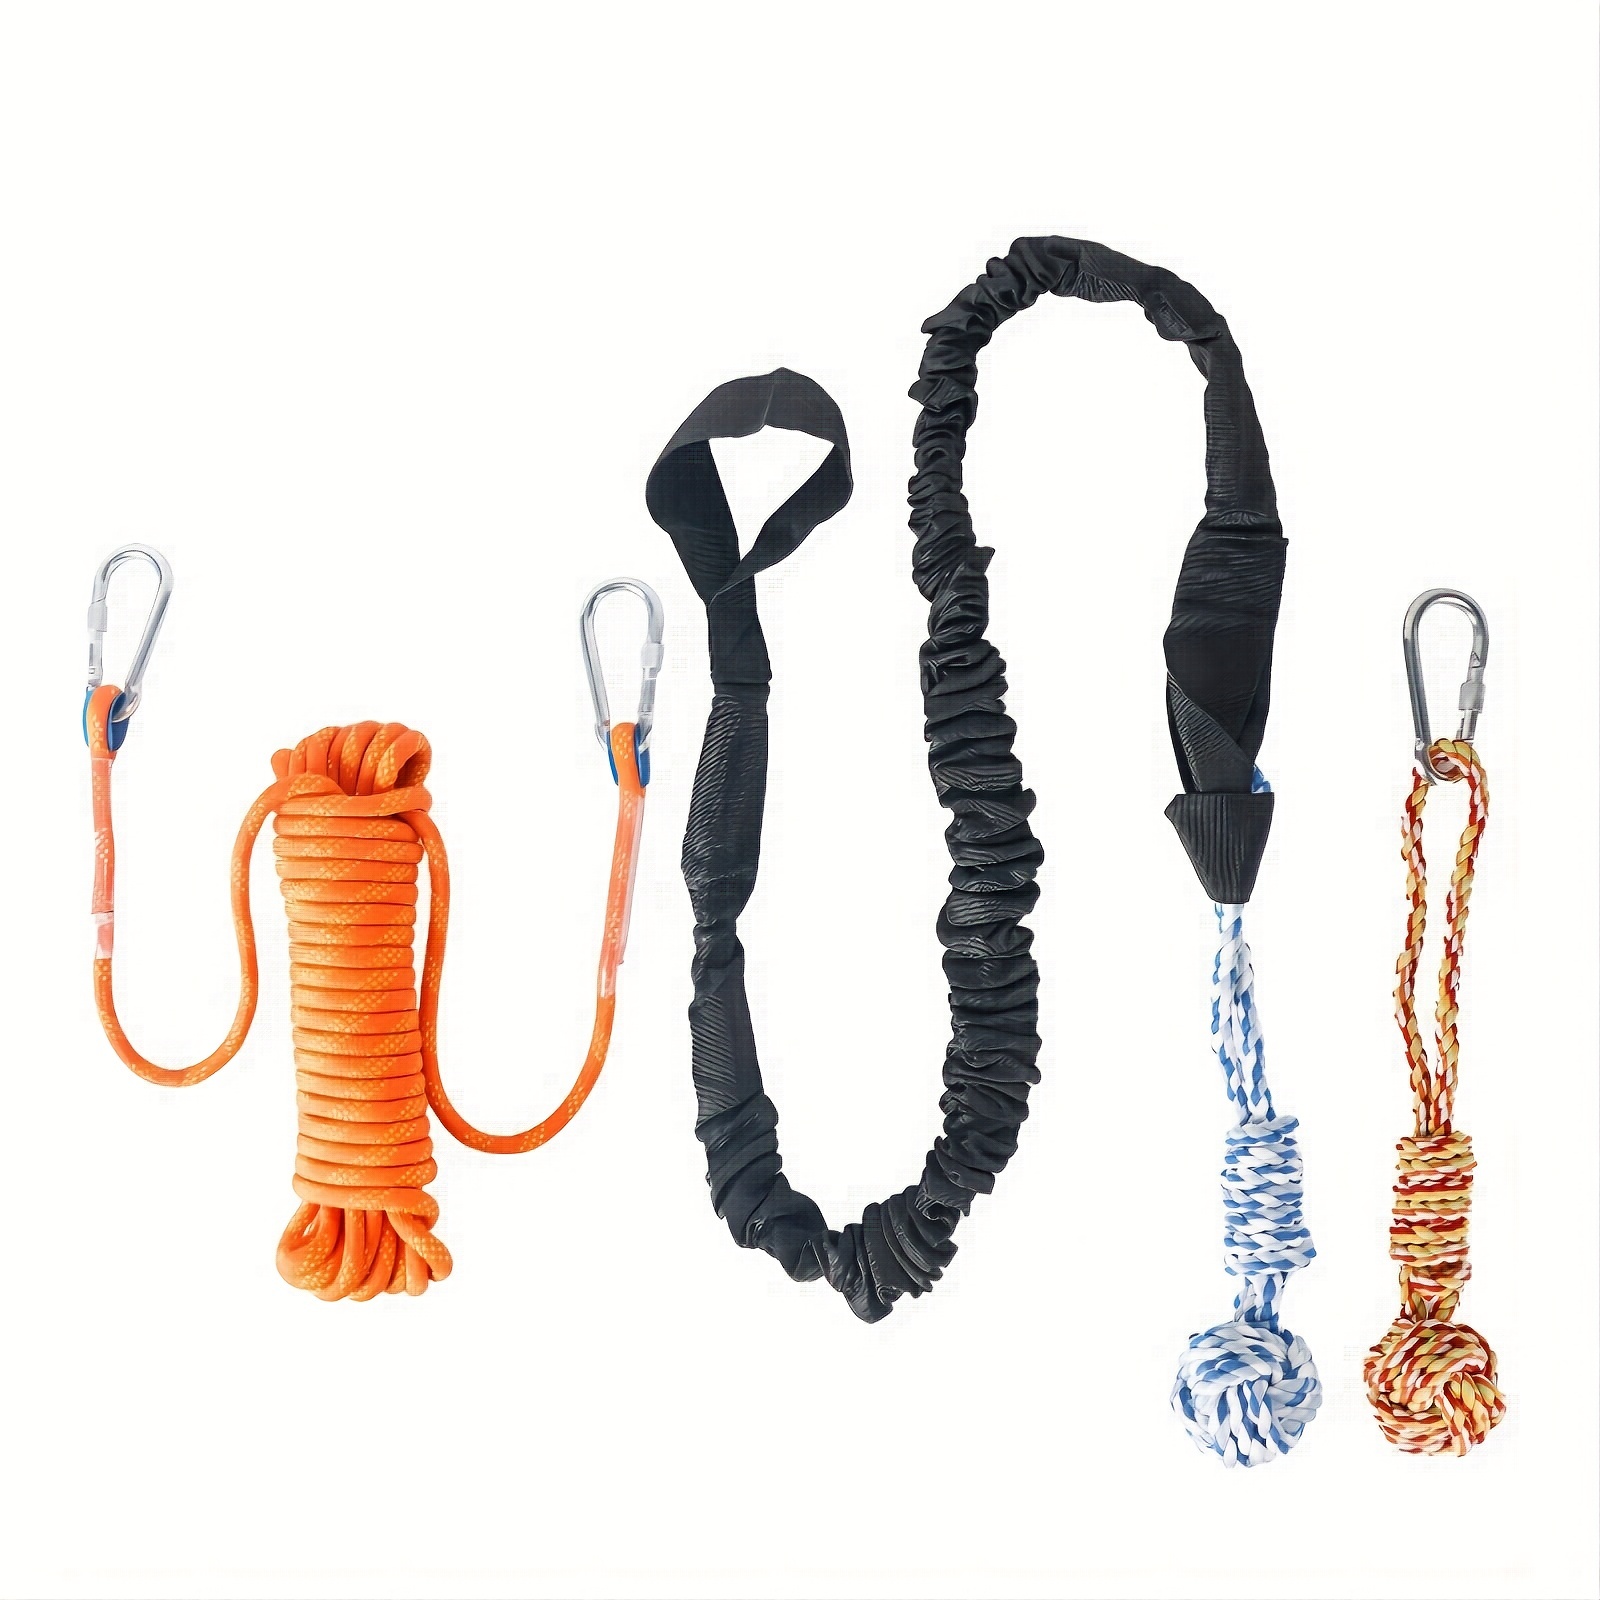 HOPET Dog Outdoor Bungee Solo Hanging Toy, Tether Tug of War Dog